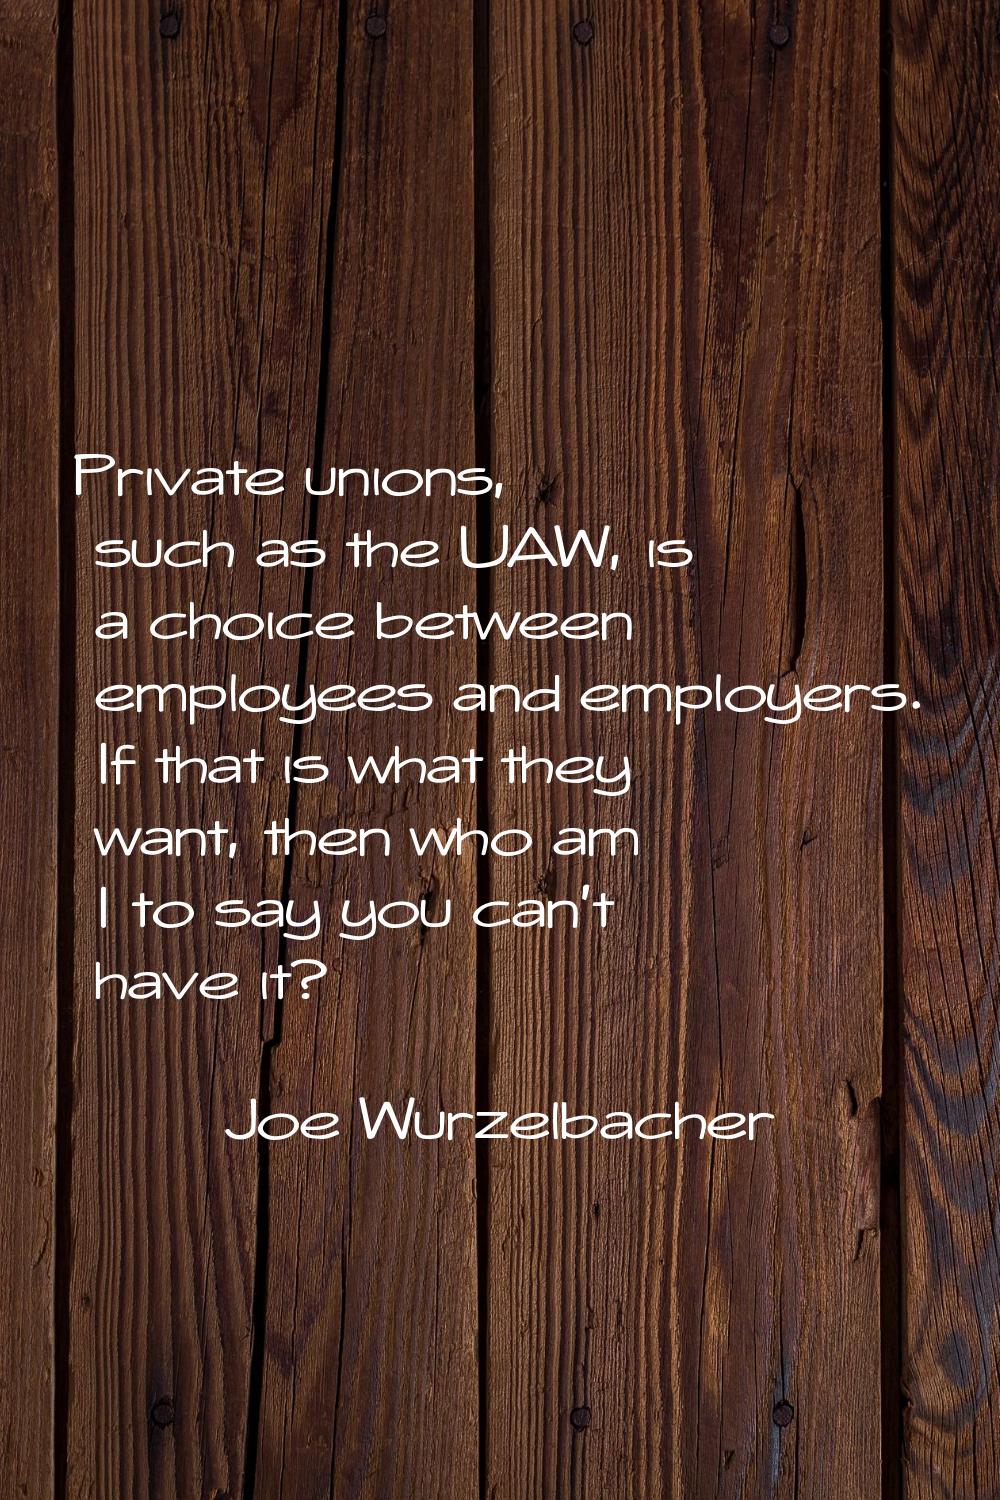 Private unions, such as the UAW, is a choice between employees and employers. If that is what they 